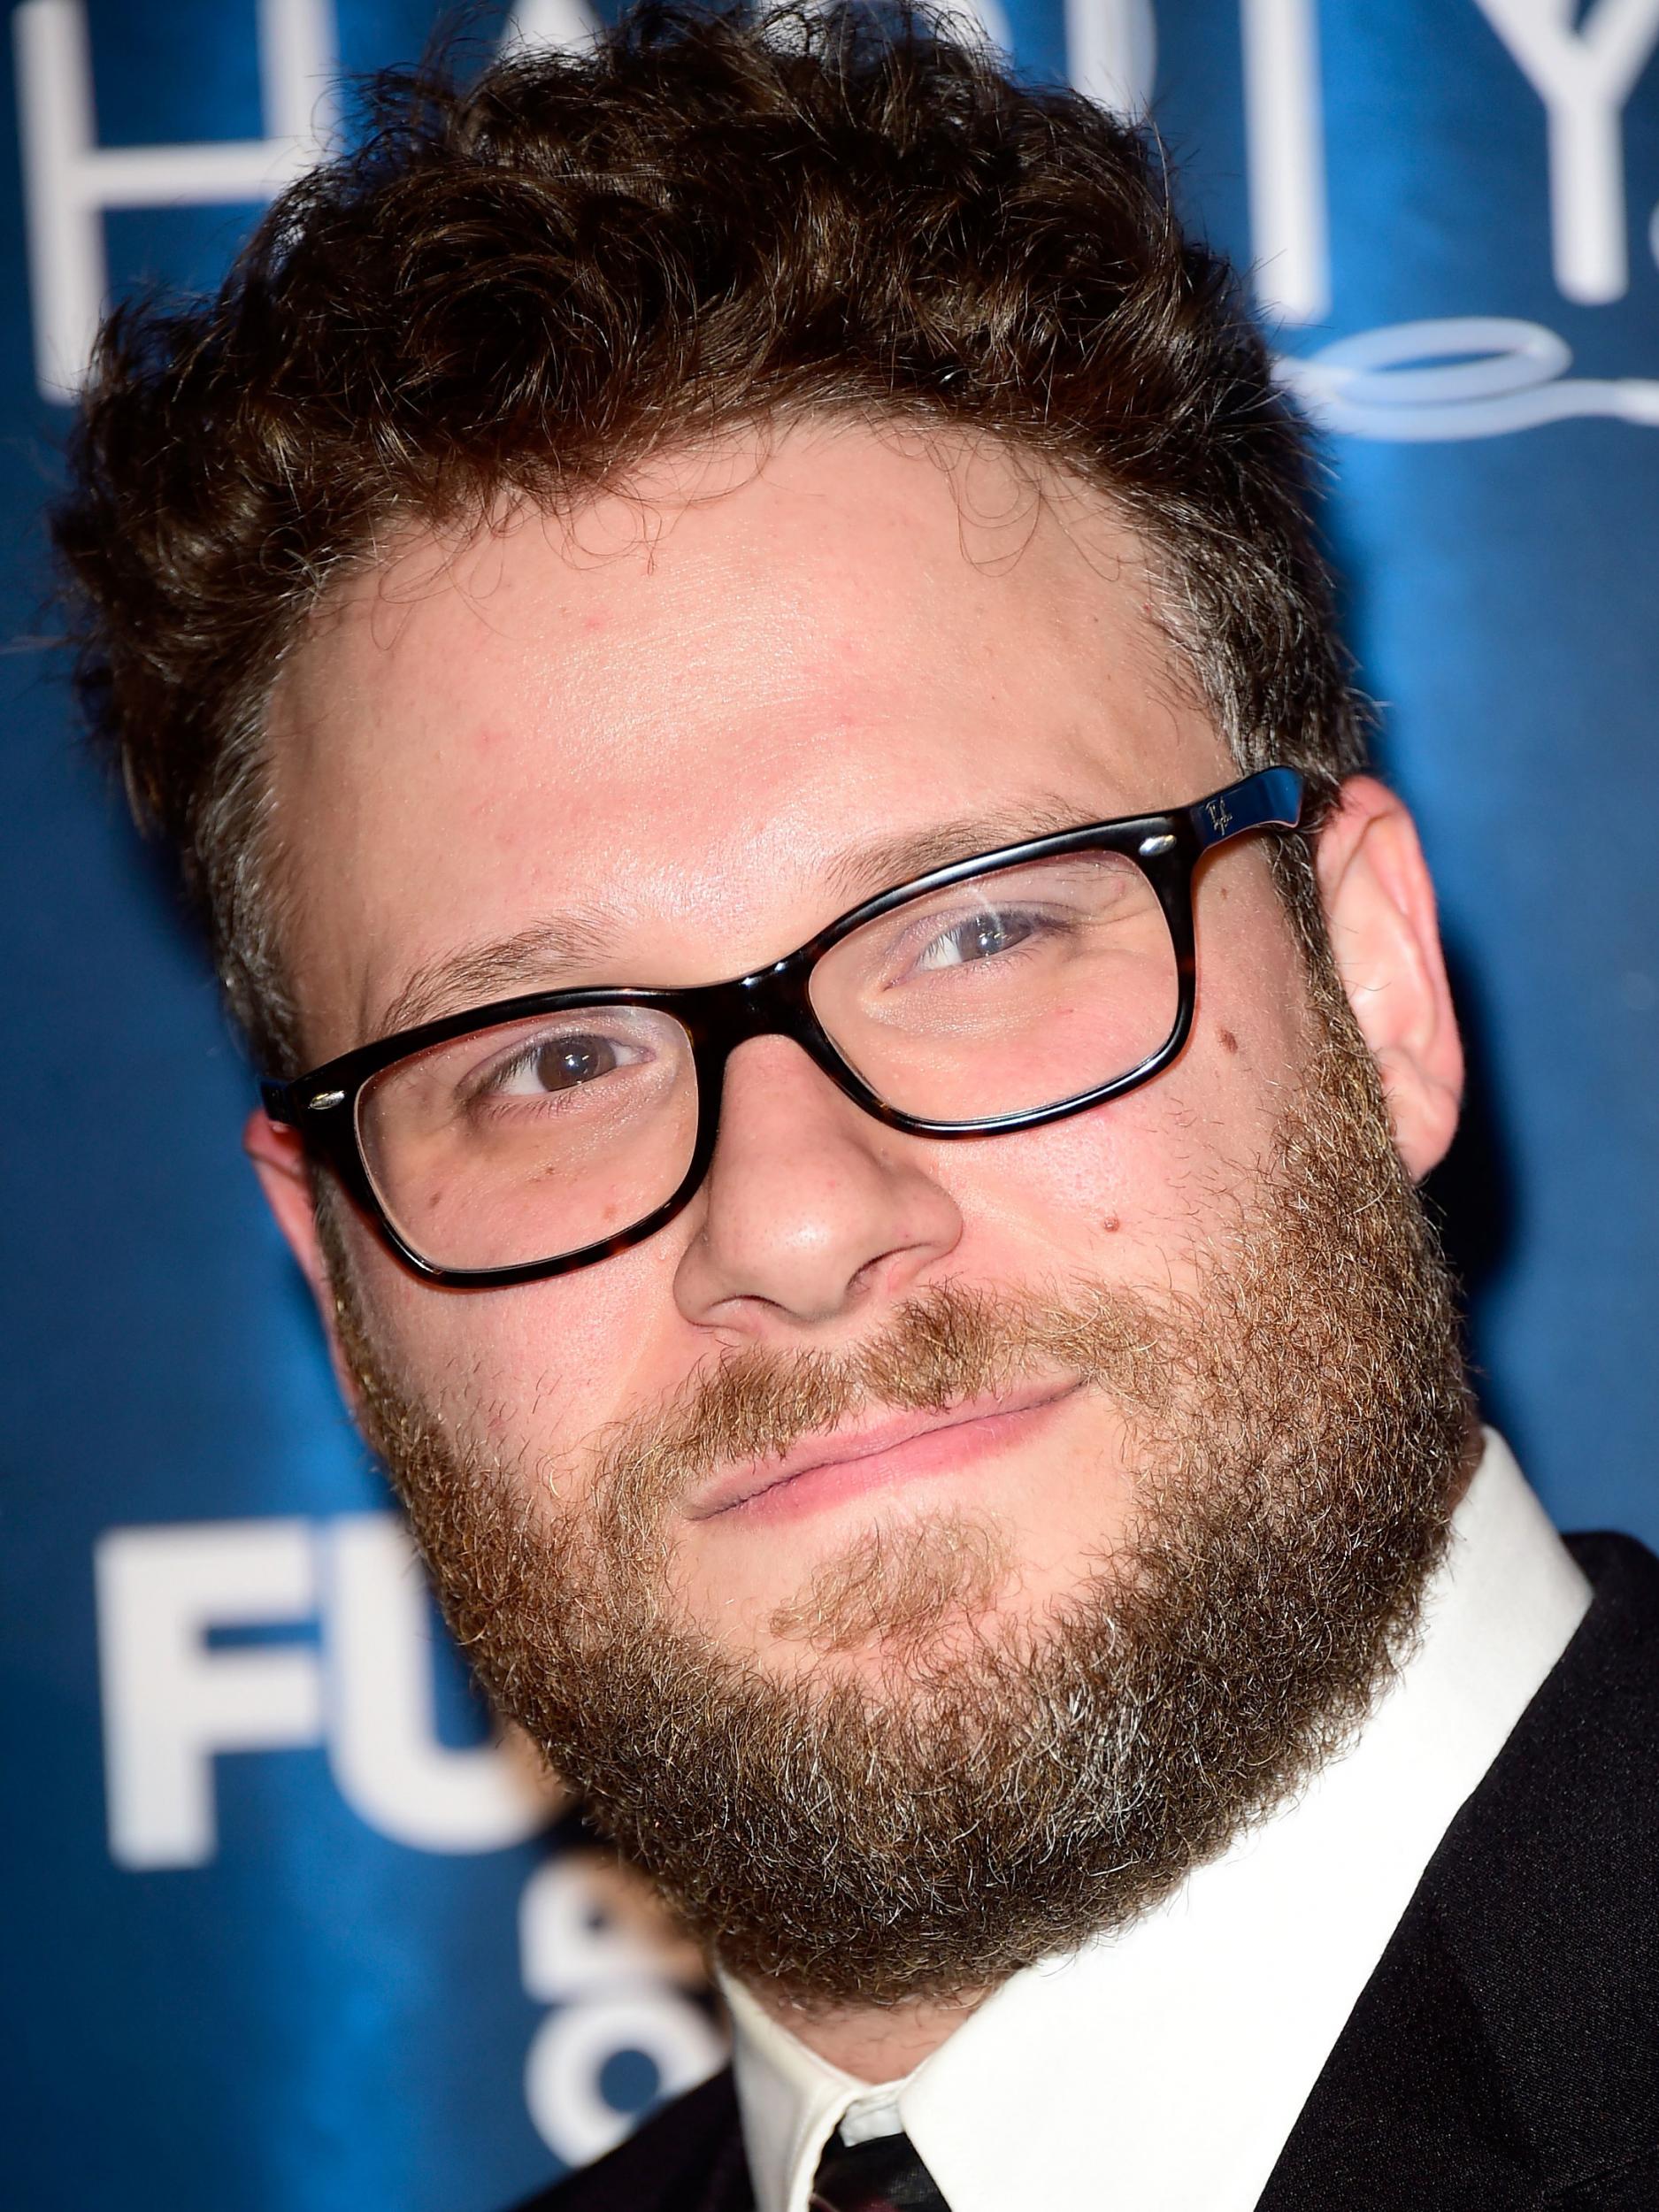 Seth Rogen criticised Ben Carson's comments on gun ownership